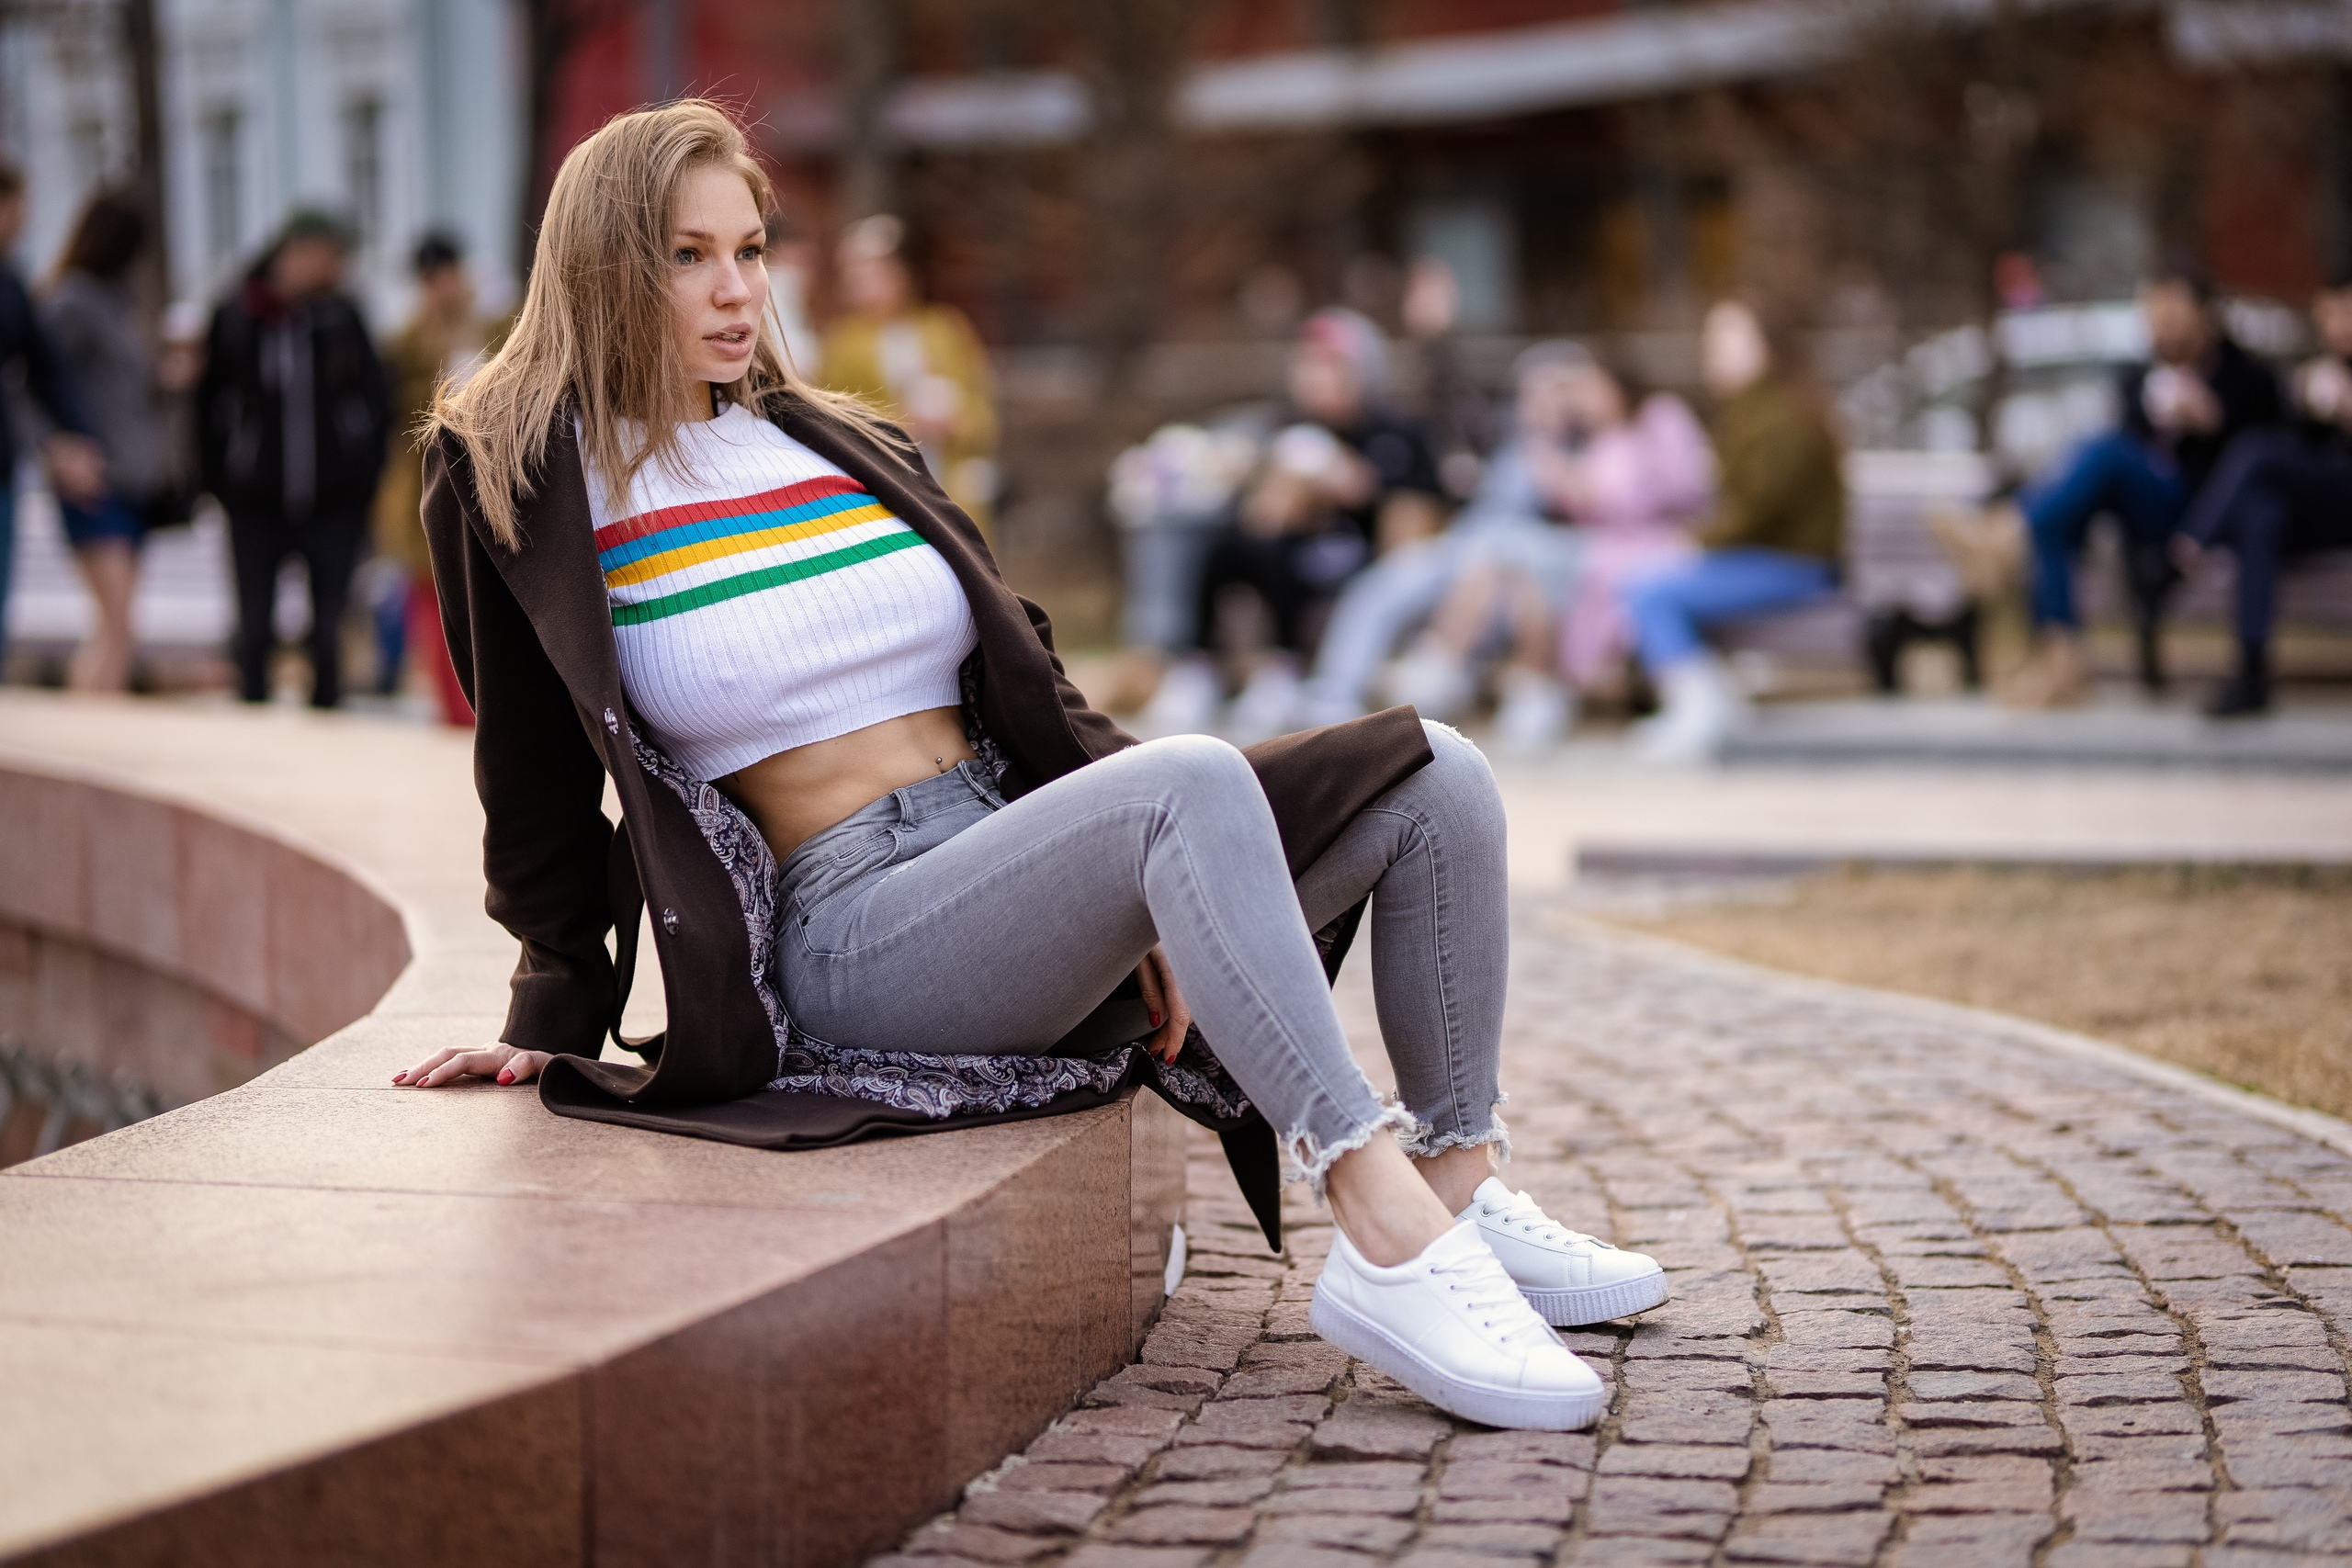 People 2560x1707 Anna Bykanova women model blonde long hair looking away smiling crop top white tops belly pierced navel jeans coats sitting urban depth of field outdoors women outdoors Ilya Pistoletov no bra nipples through clothing painted nails red nails people brown jacket T-shirt striped tops nipple bulge